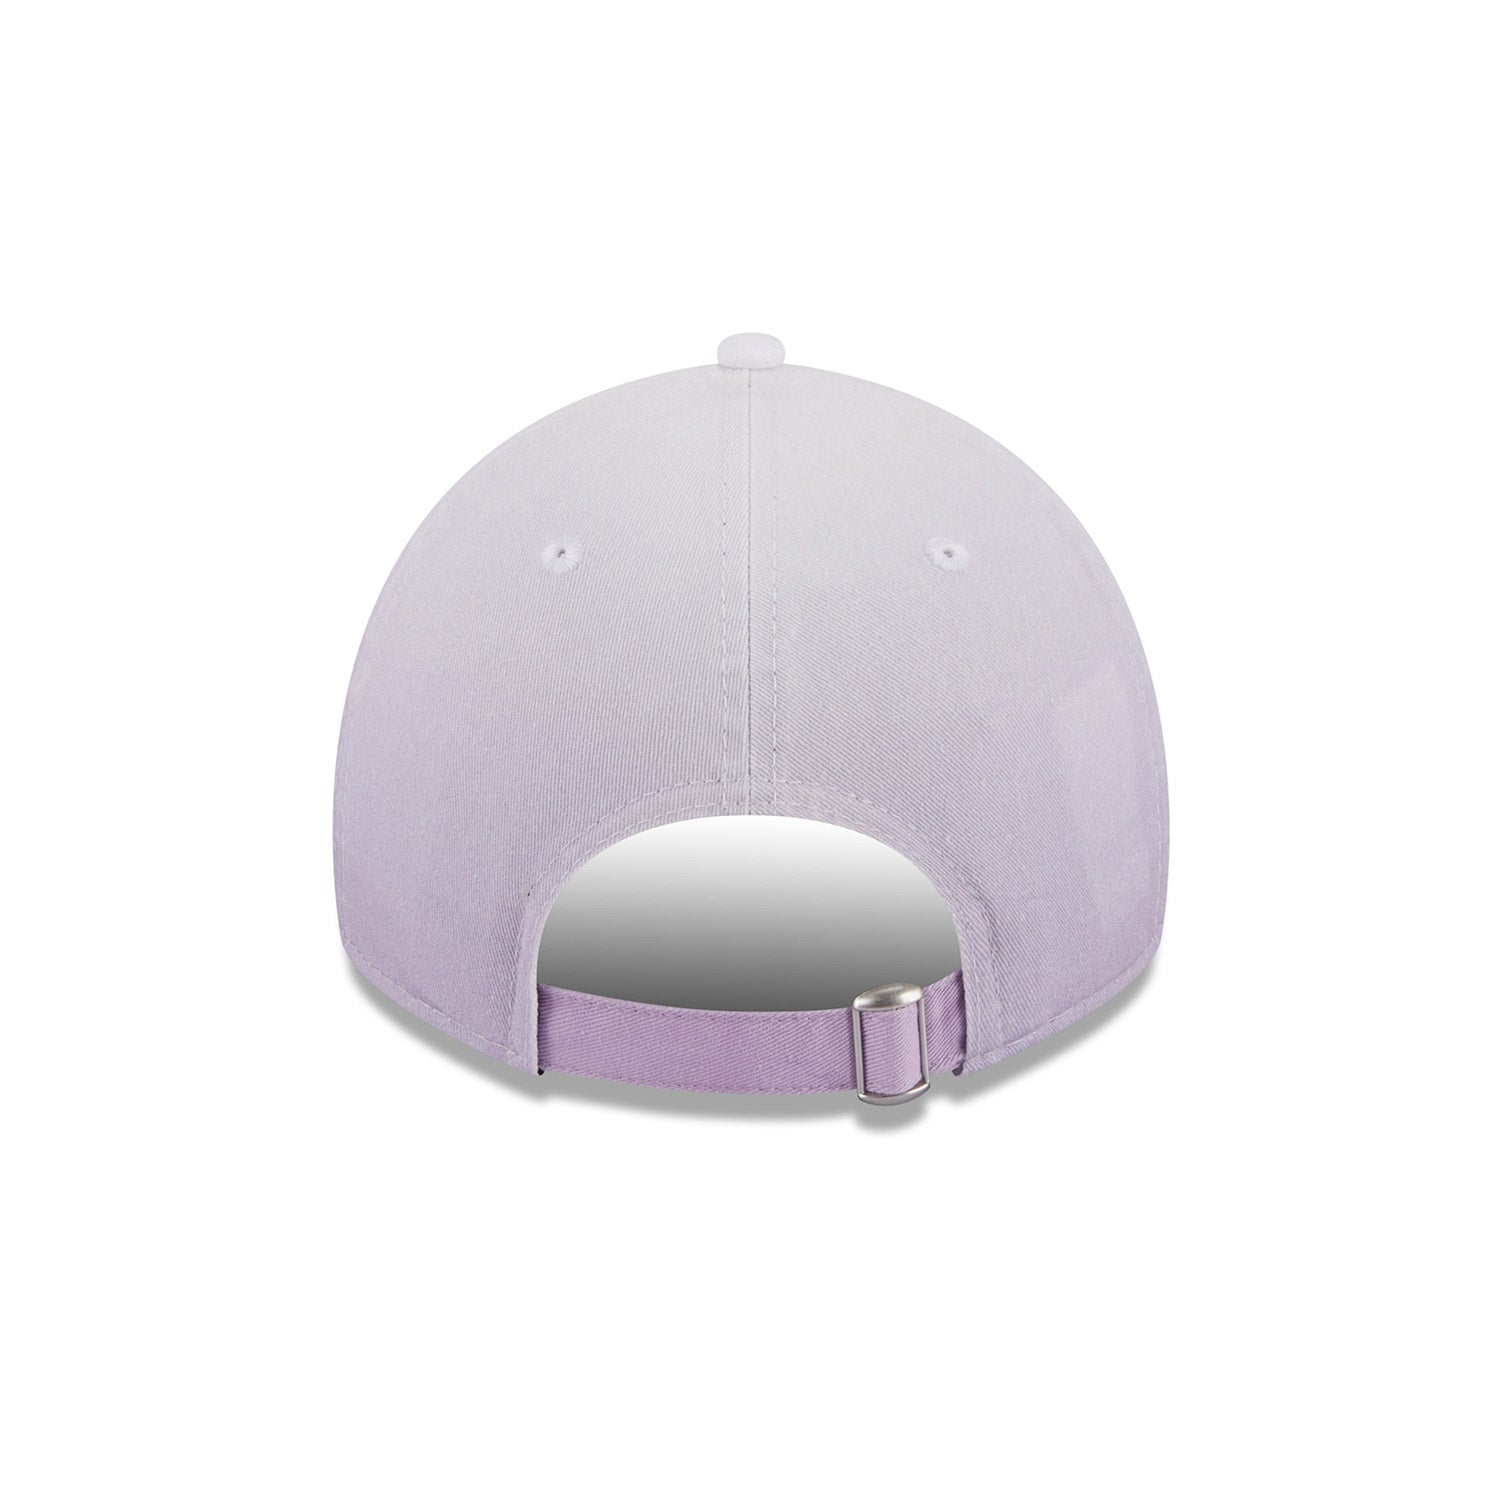 New Era Knicks Colorpack Ombre Purple Adjustable Hat - Back View